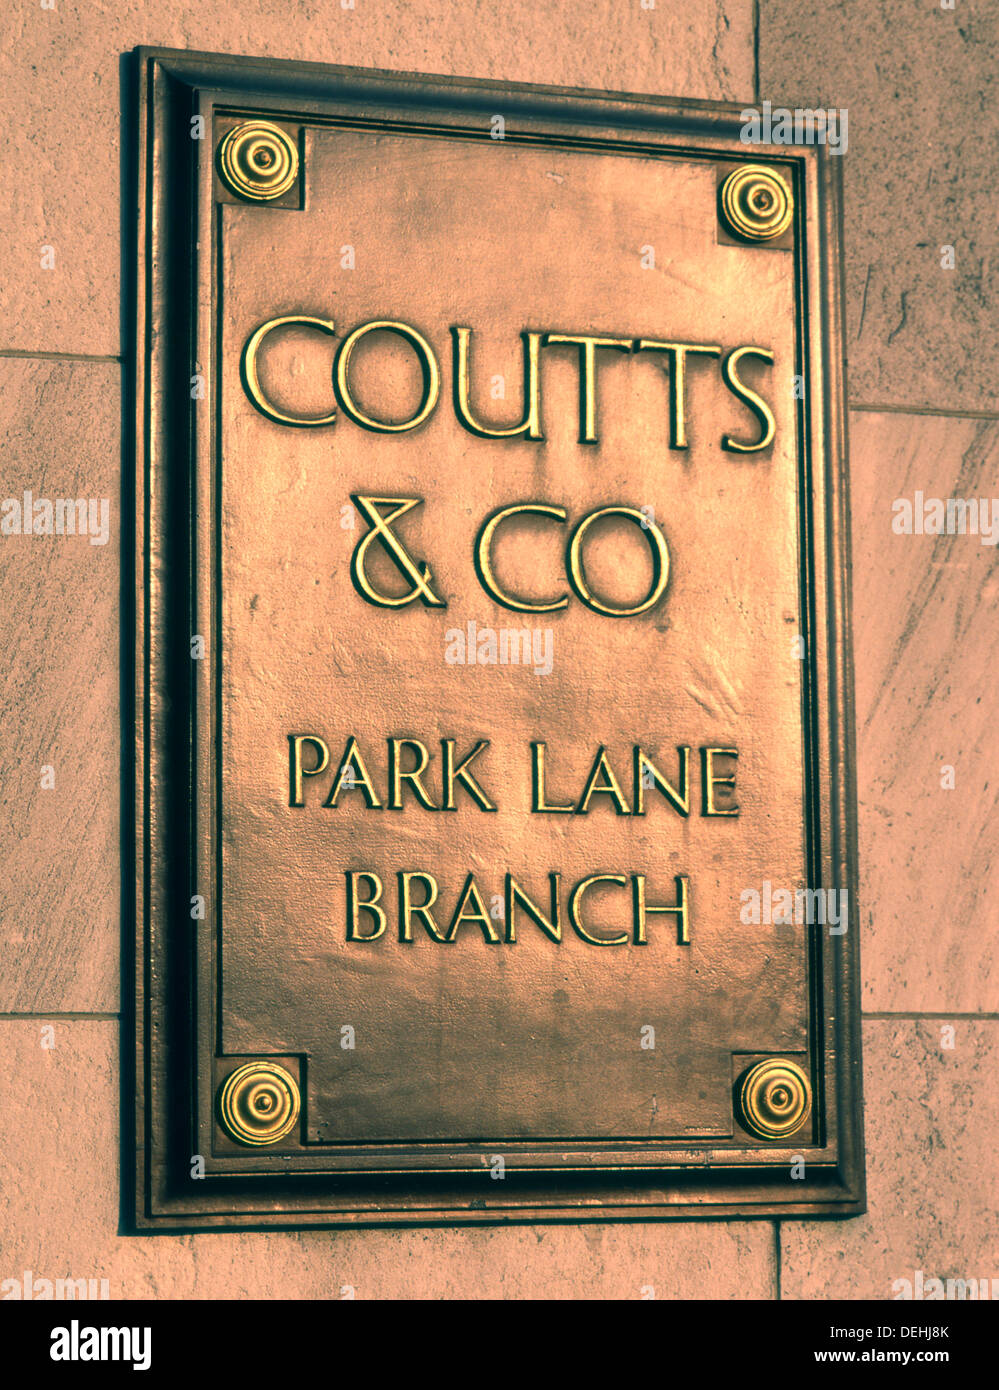 England London, Coutts bank Stock Photo